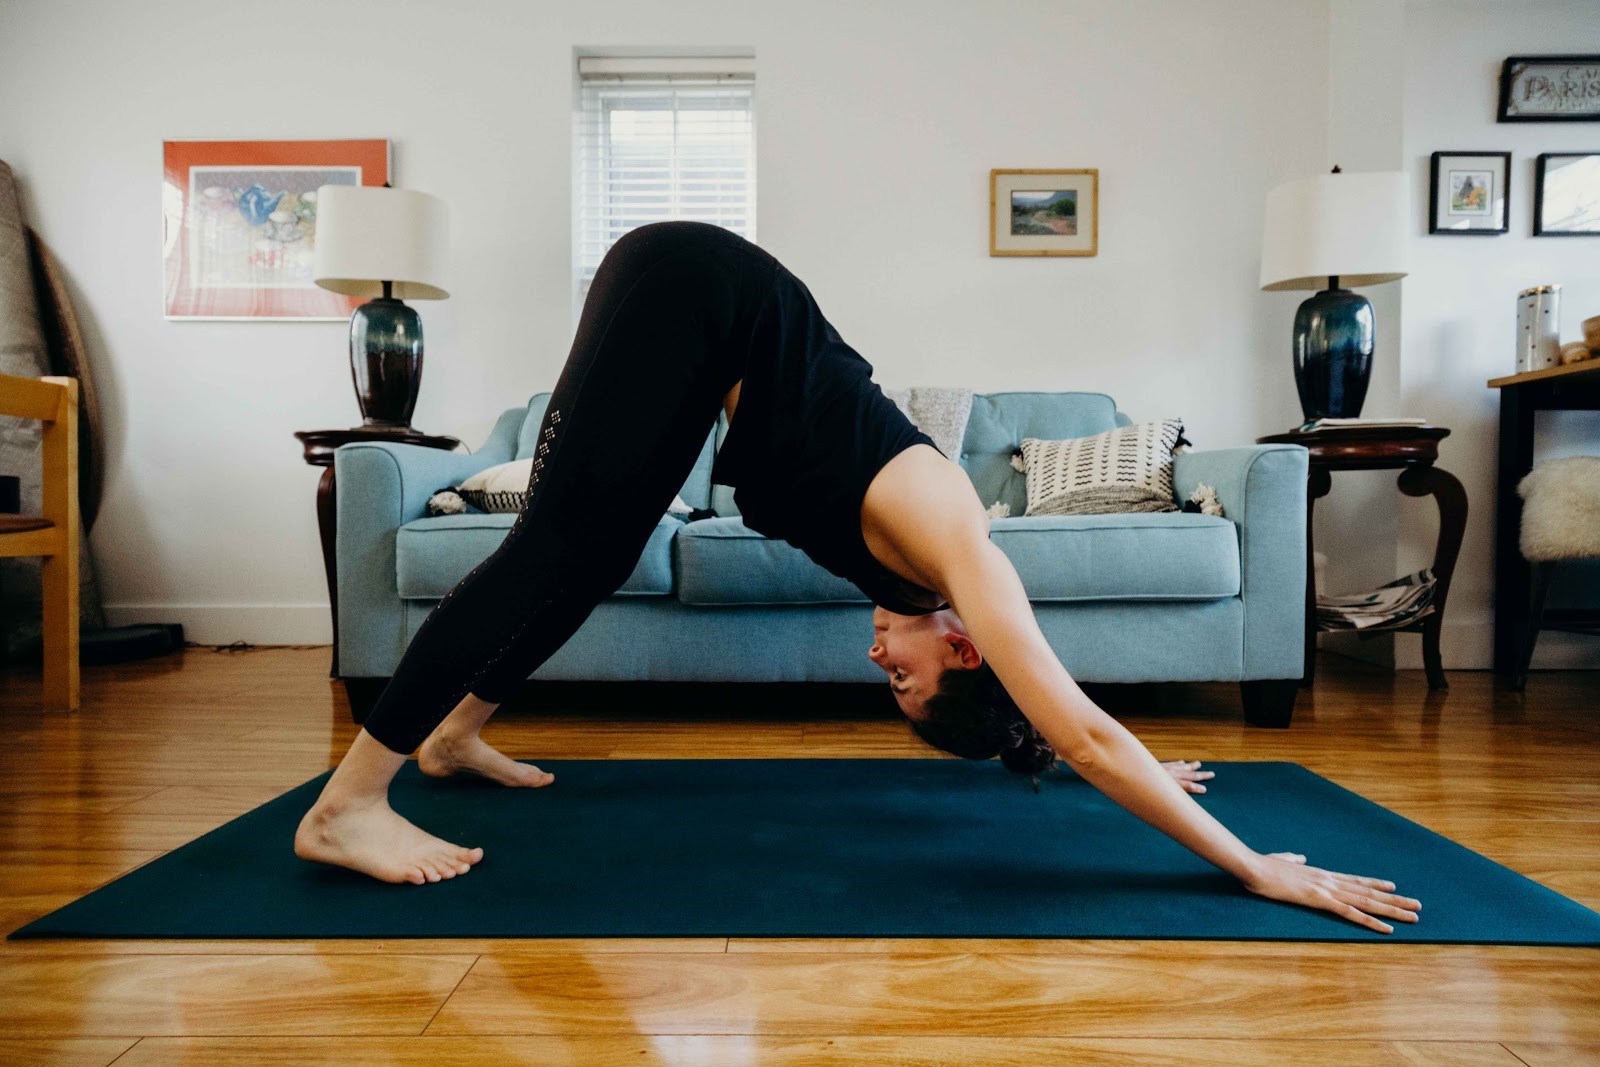 Kaya Health Clubs  Tips for Developing a Home Yoga Routine